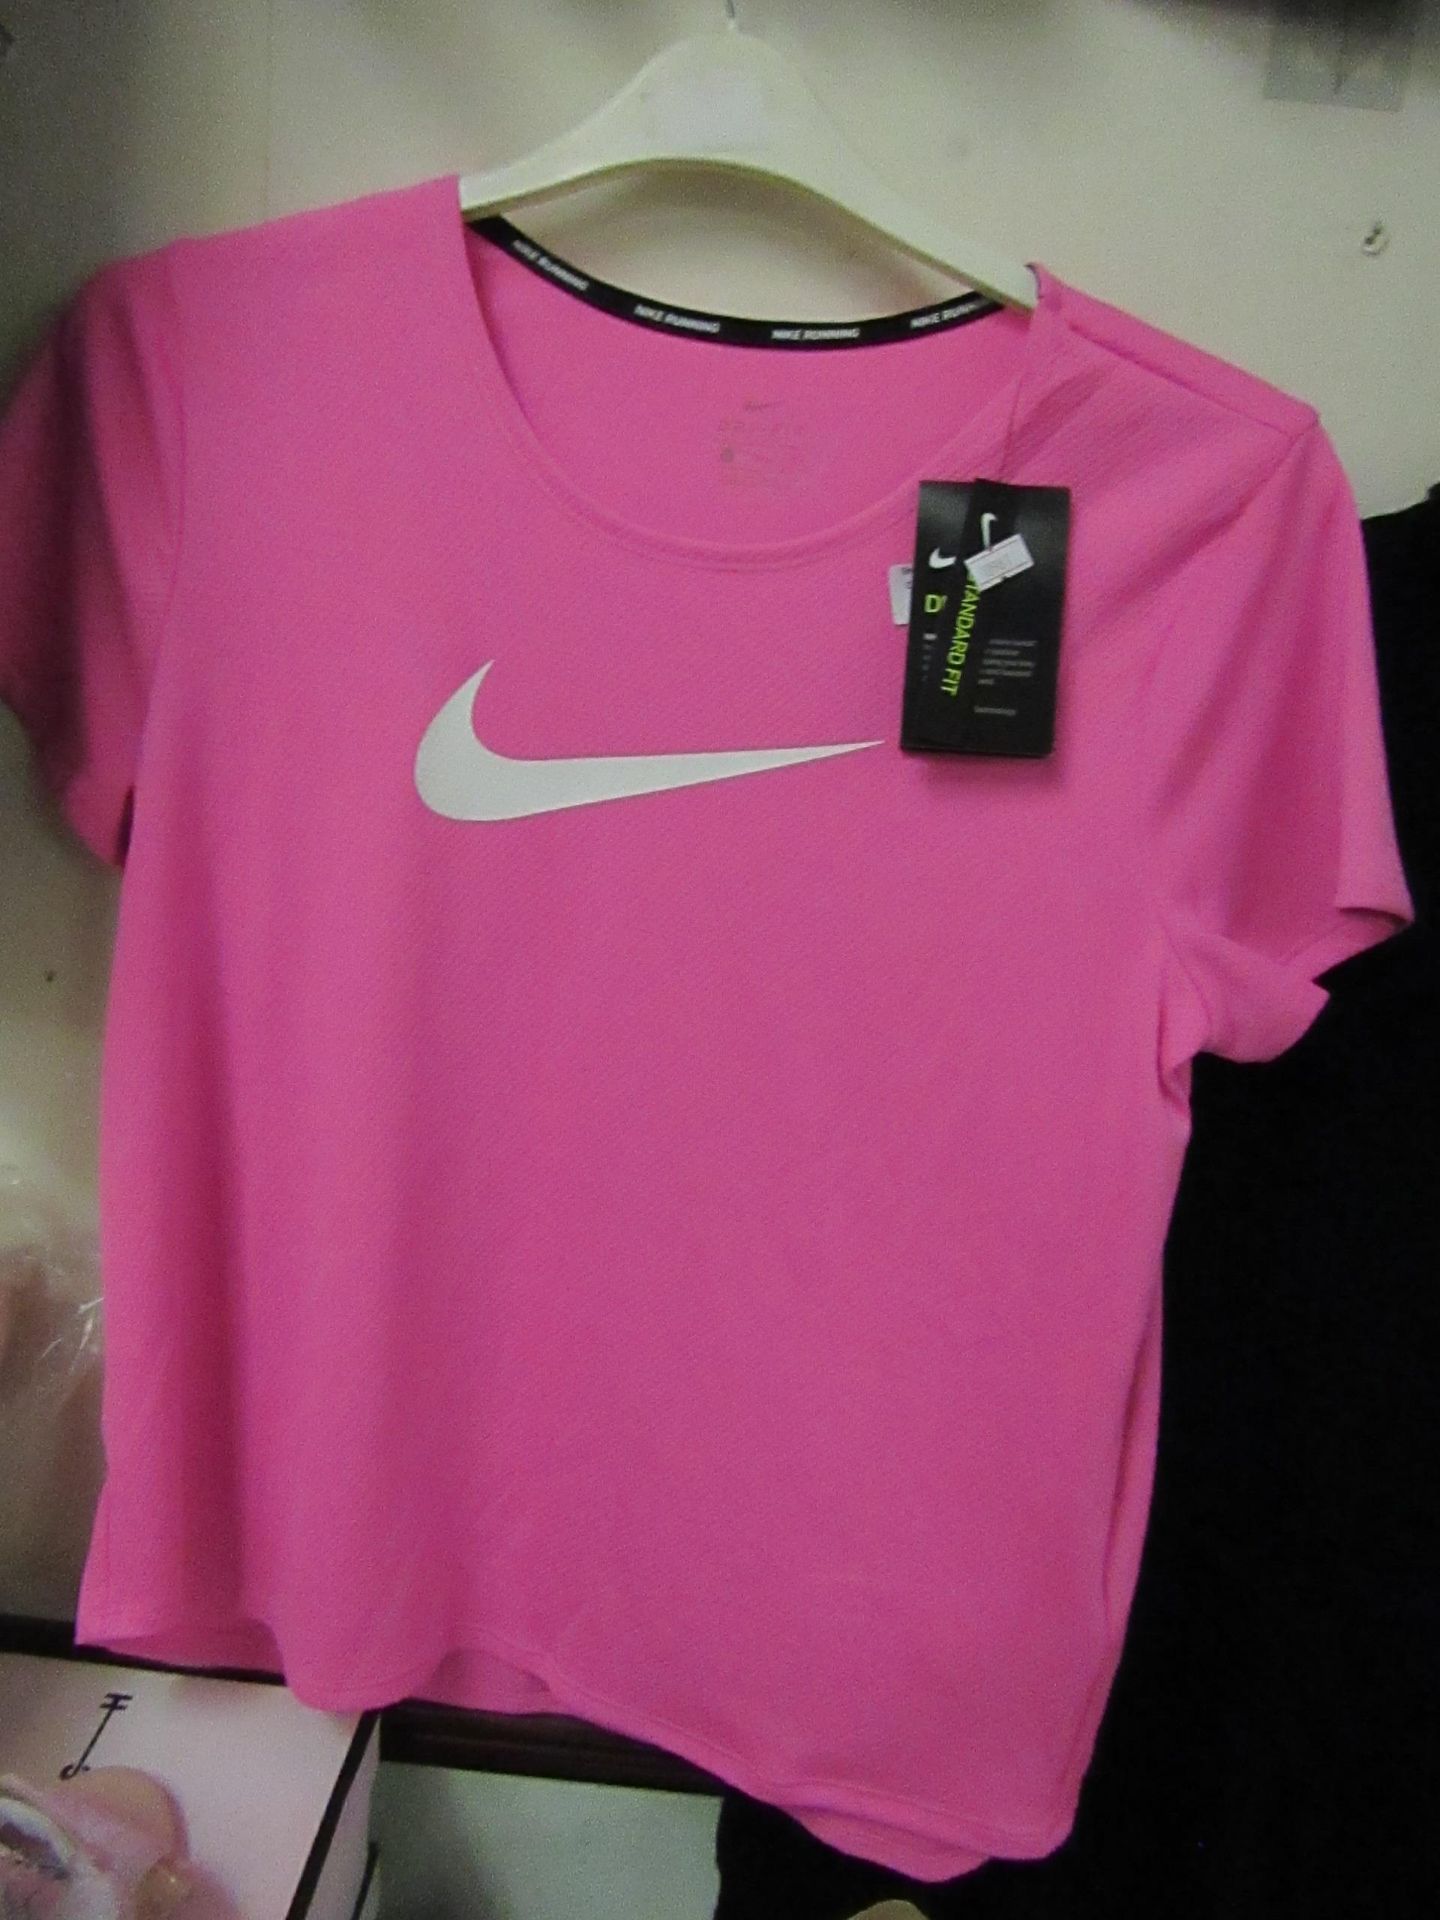 Nike Training T/Shirt Pink Size S New & Packaged